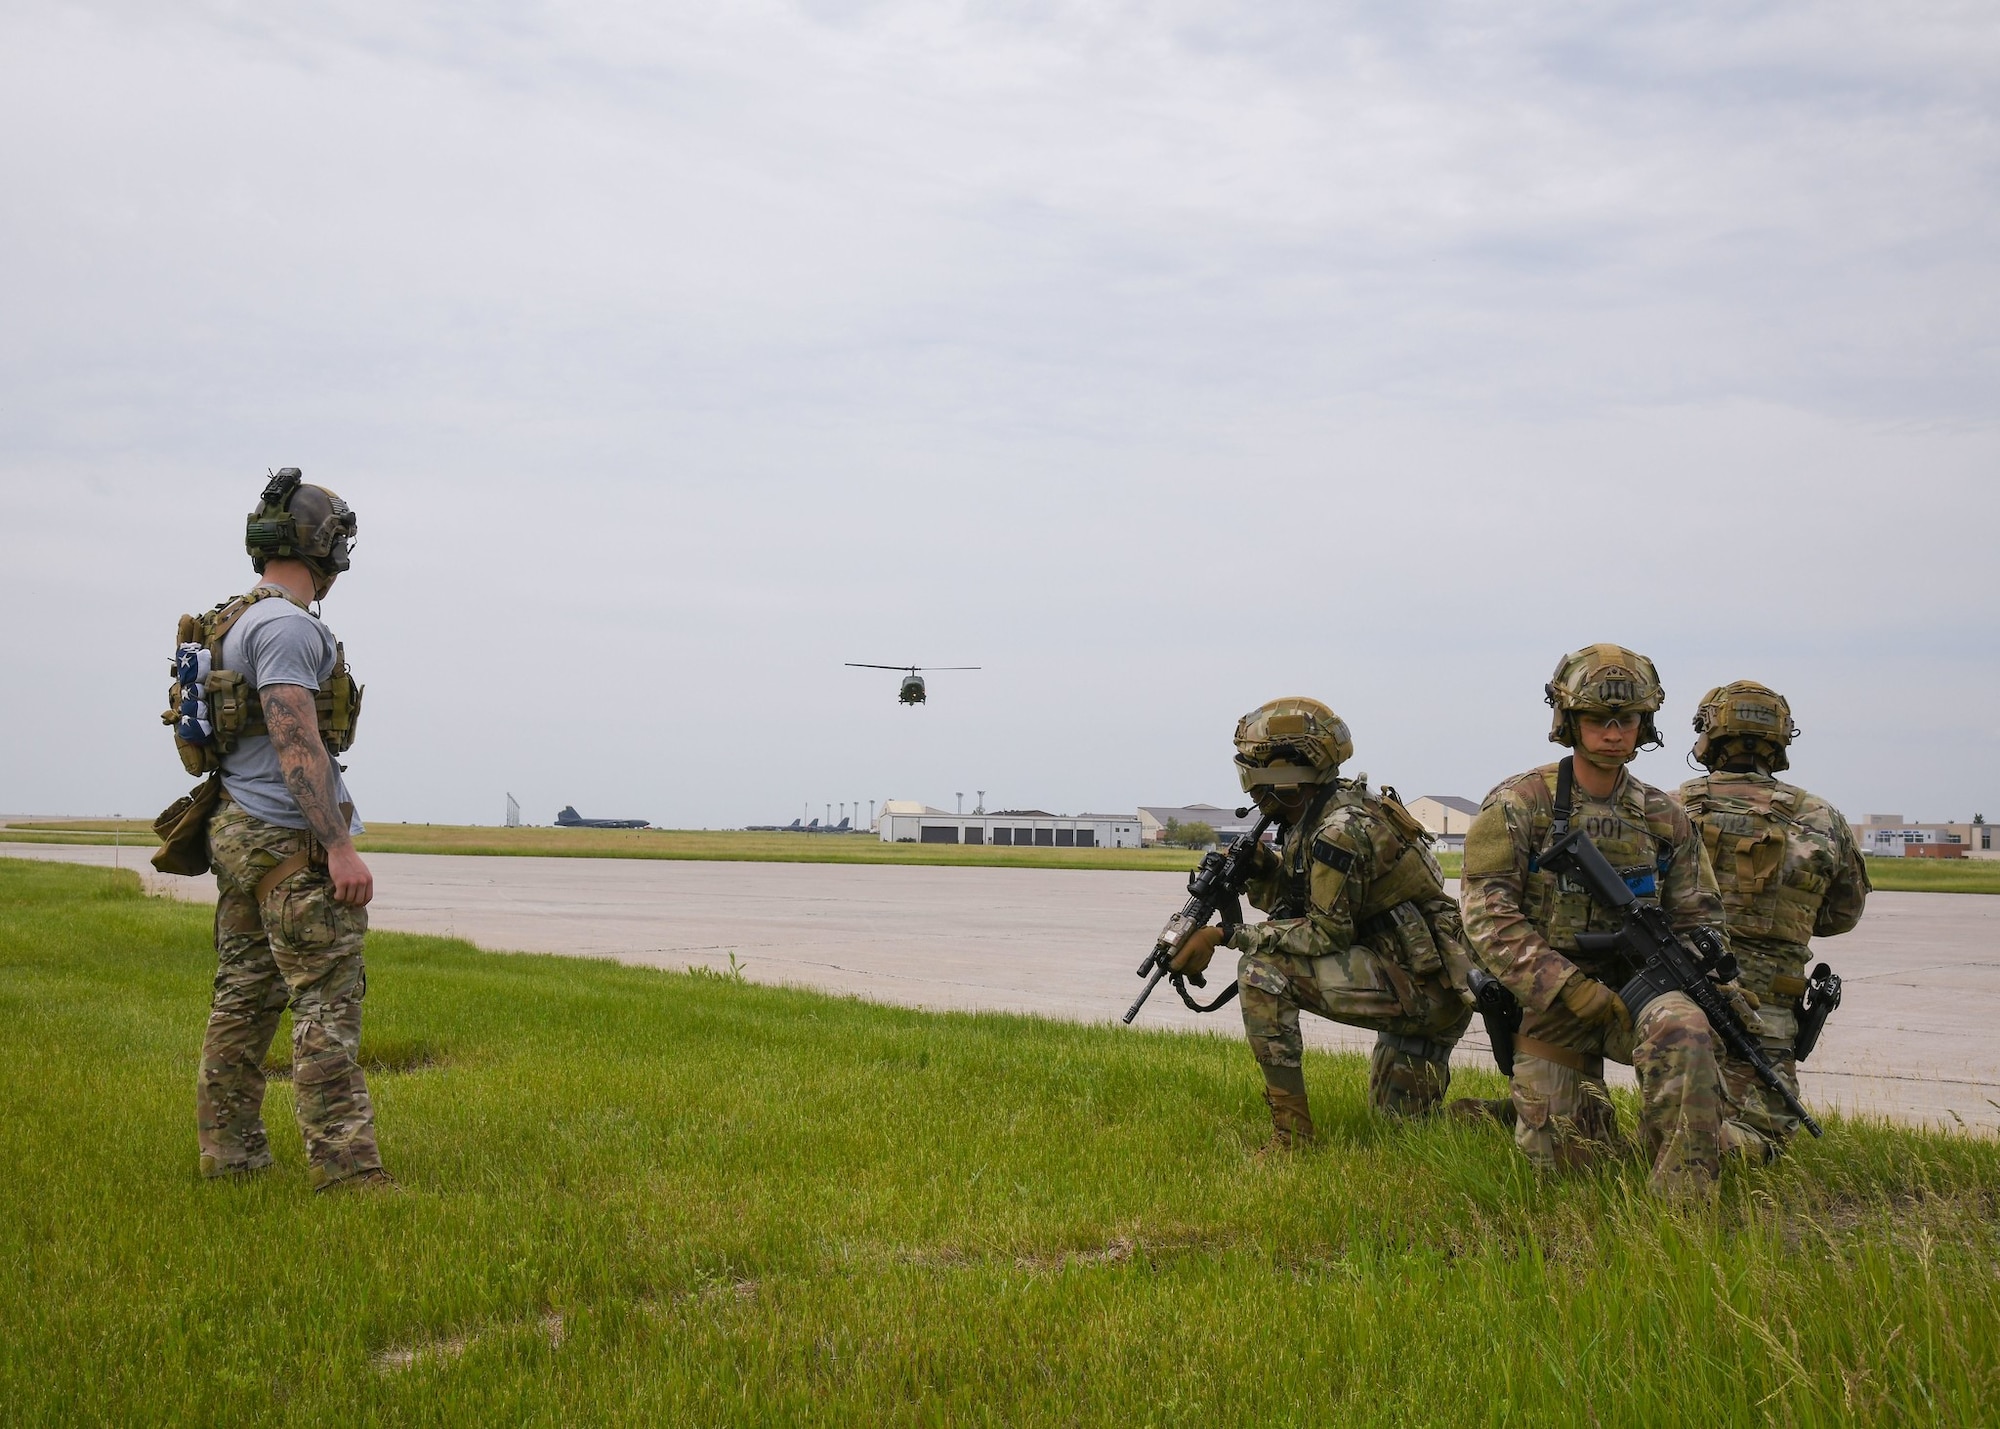 Team Minot Airmen prepare to board a helicopter June 16, 2020, at Minot Air Force Base, North Dakota. Helicopter boarding and exiting is a main part of Team Minot’s Tactical Response Force’s mission. (U.S. Air Force Photos By Airman 1st Class Caleb S. Kimmell)